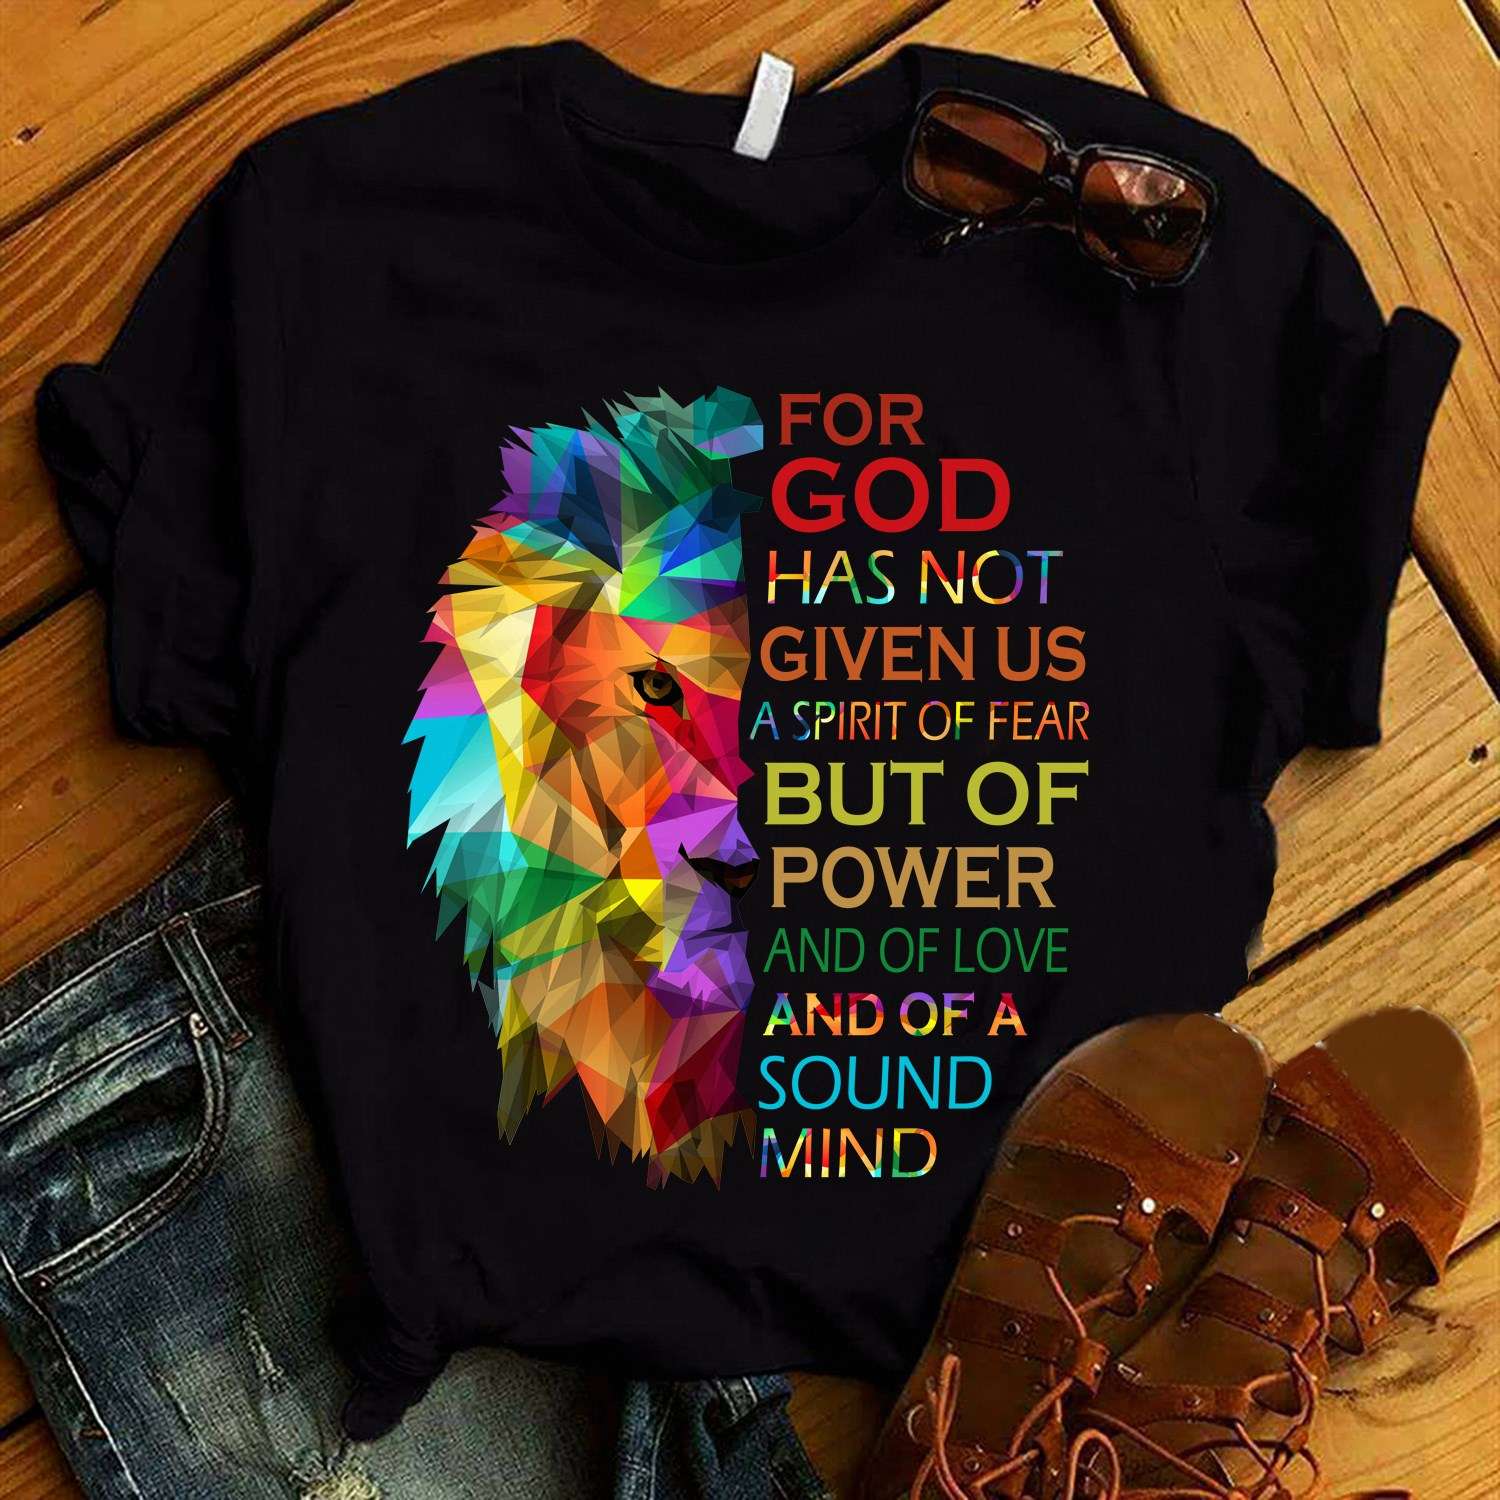 Lion God - For god has not given us a spirit of fear but of power and of love and of a sound mind